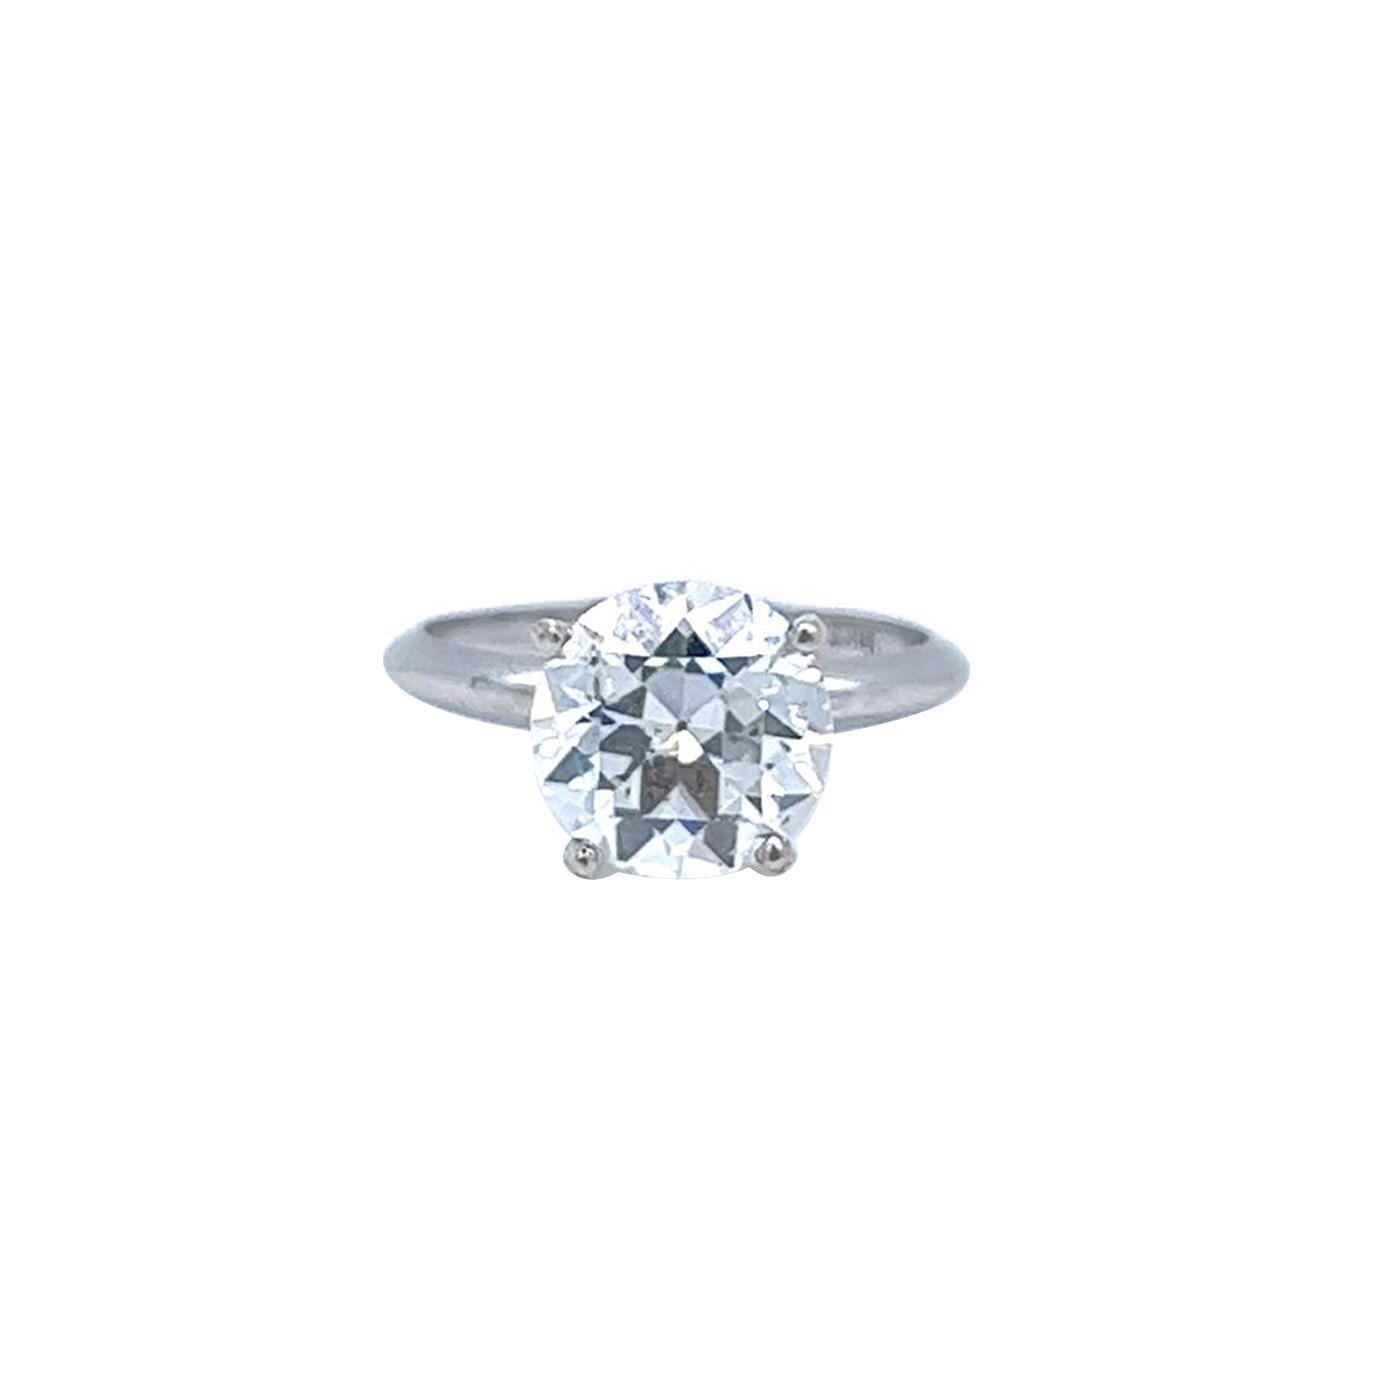 This Solitaire 14k White Gold ring is one of the most stunning. The ring ring weighs 2.4 grams and is currently size 5.25 with easy adjustment up or down. It has a Round Brilliant cut Main Stone, a Si3 clarity grade with an H Color. Wear this main